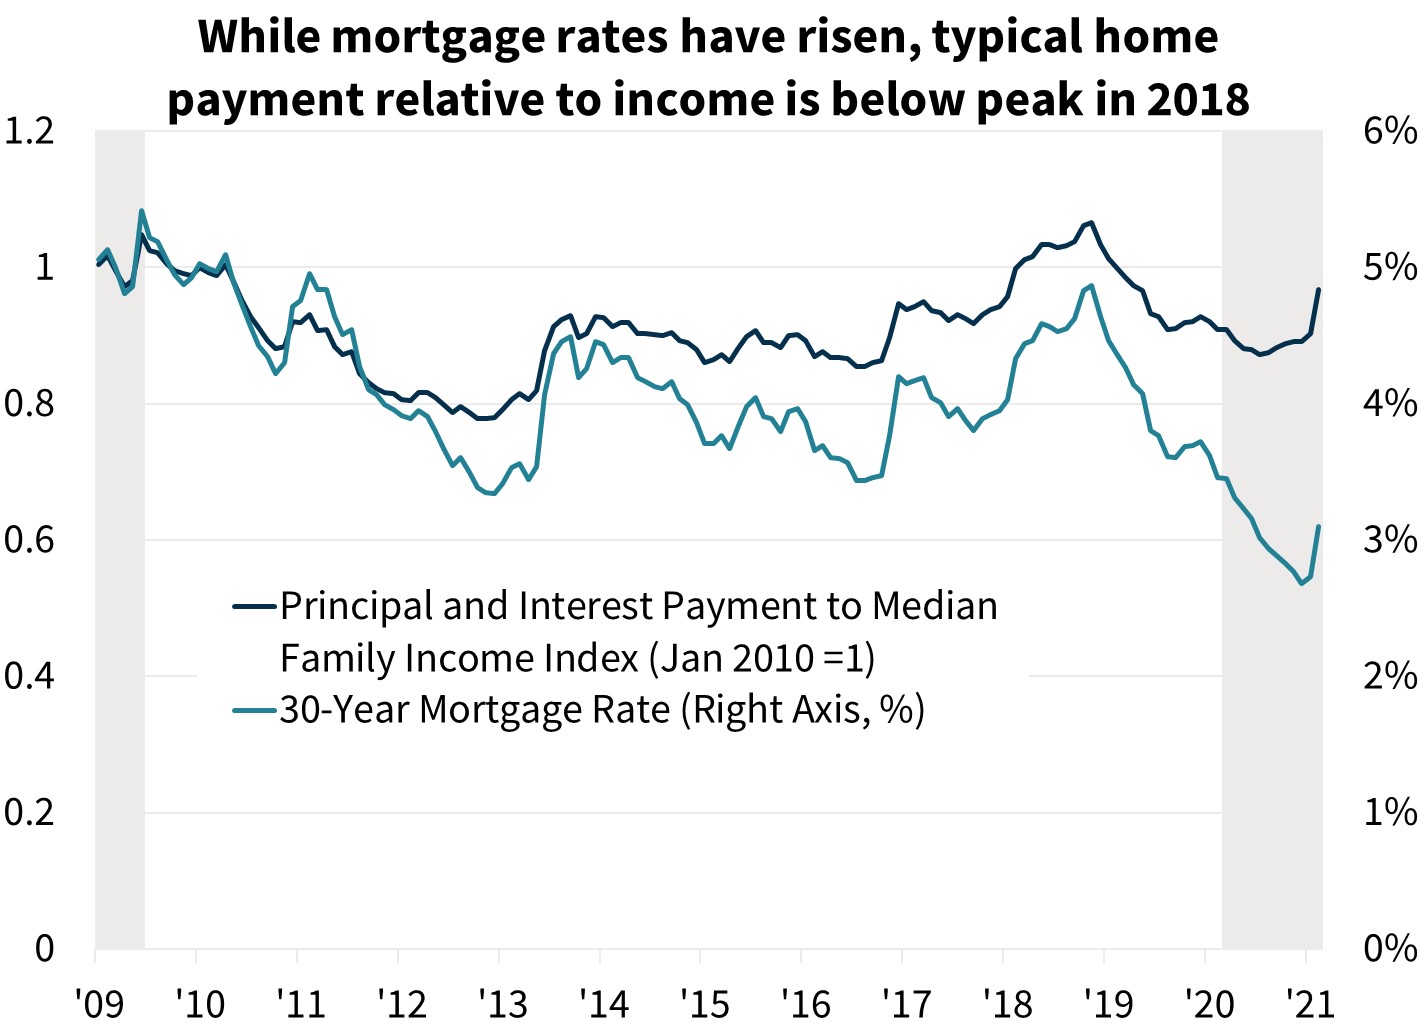  While mortgage rates have risen, typical home payment relative to income is below peak 2018
